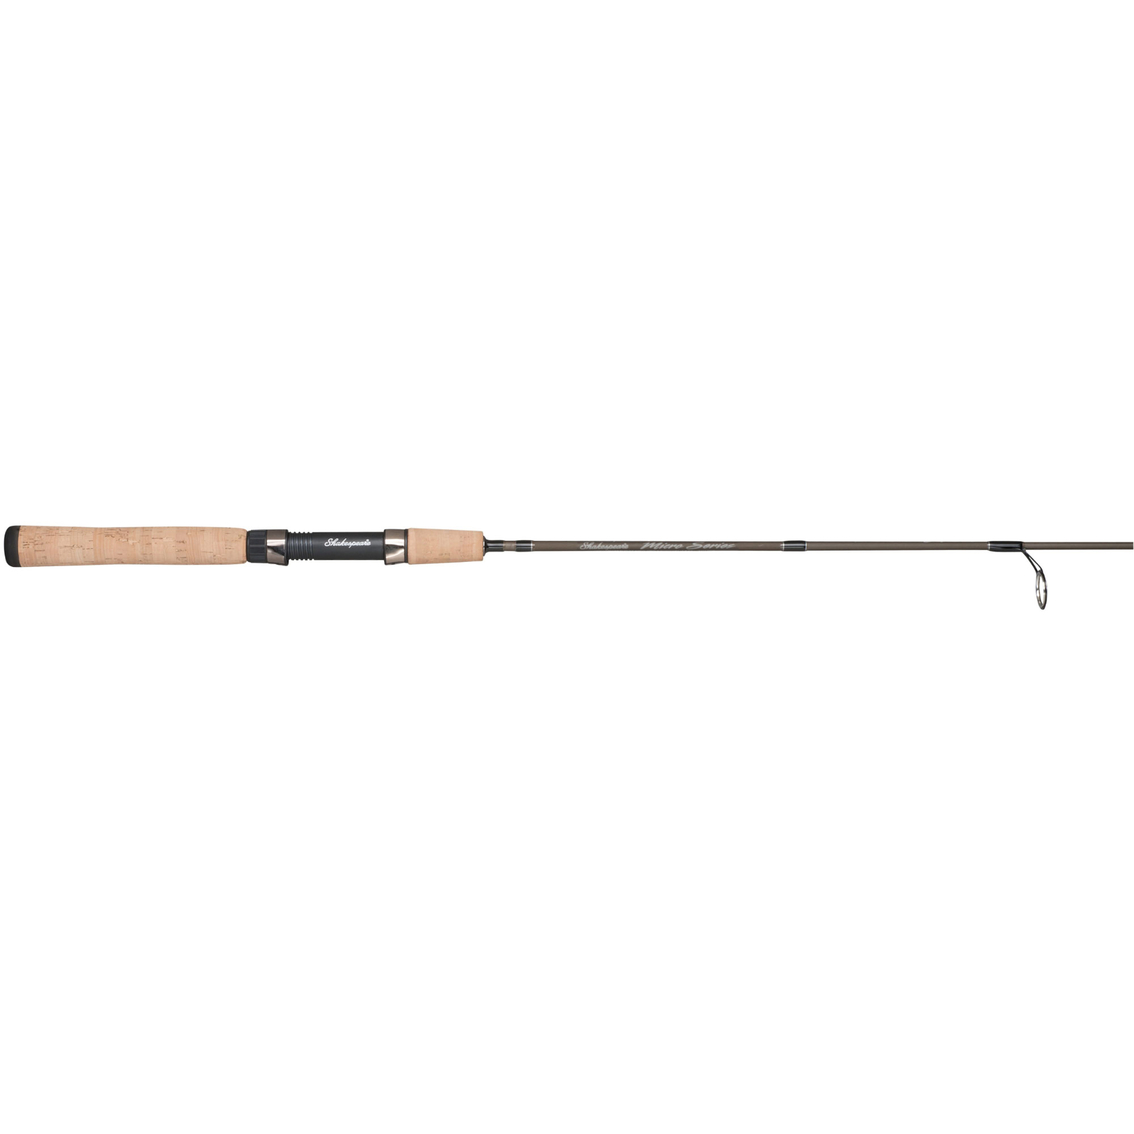 Shakespeare Micro Series Spinning Rod, 7 Ft., Freshwater Rods & Reels, Sports & Outdoors